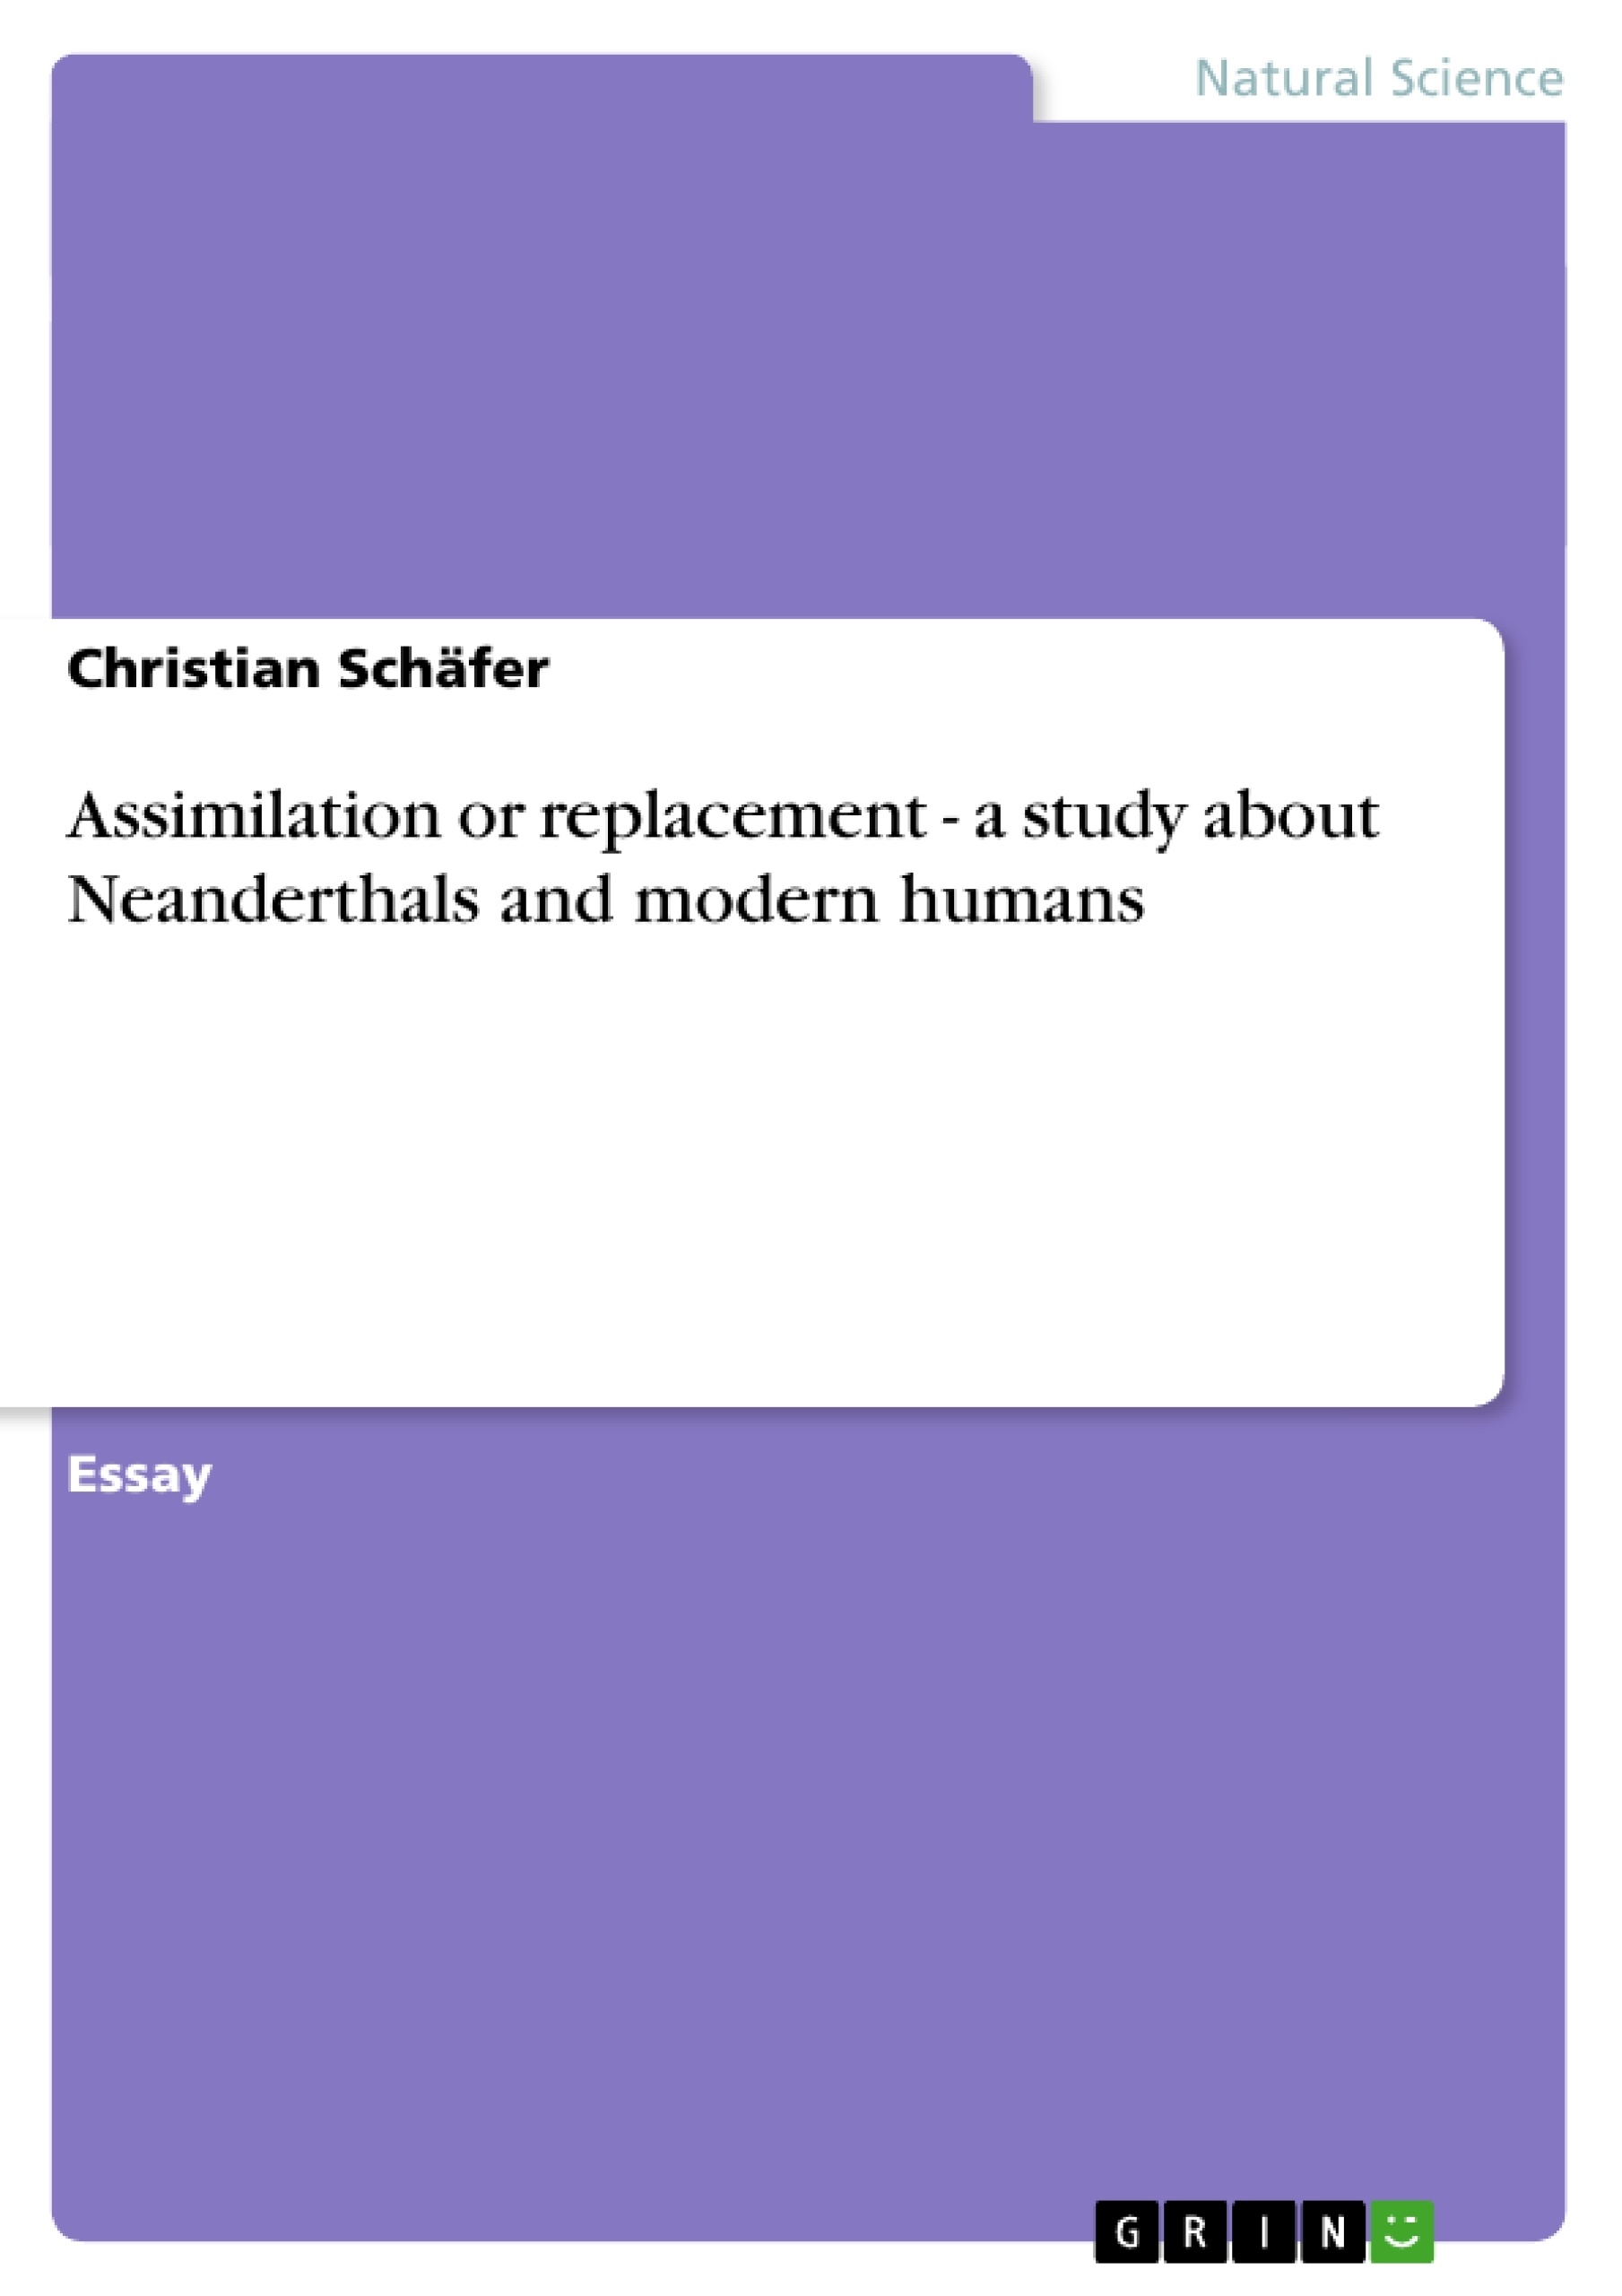 Titel: Assimilation or replacement - a study about Neanderthals and modern humans